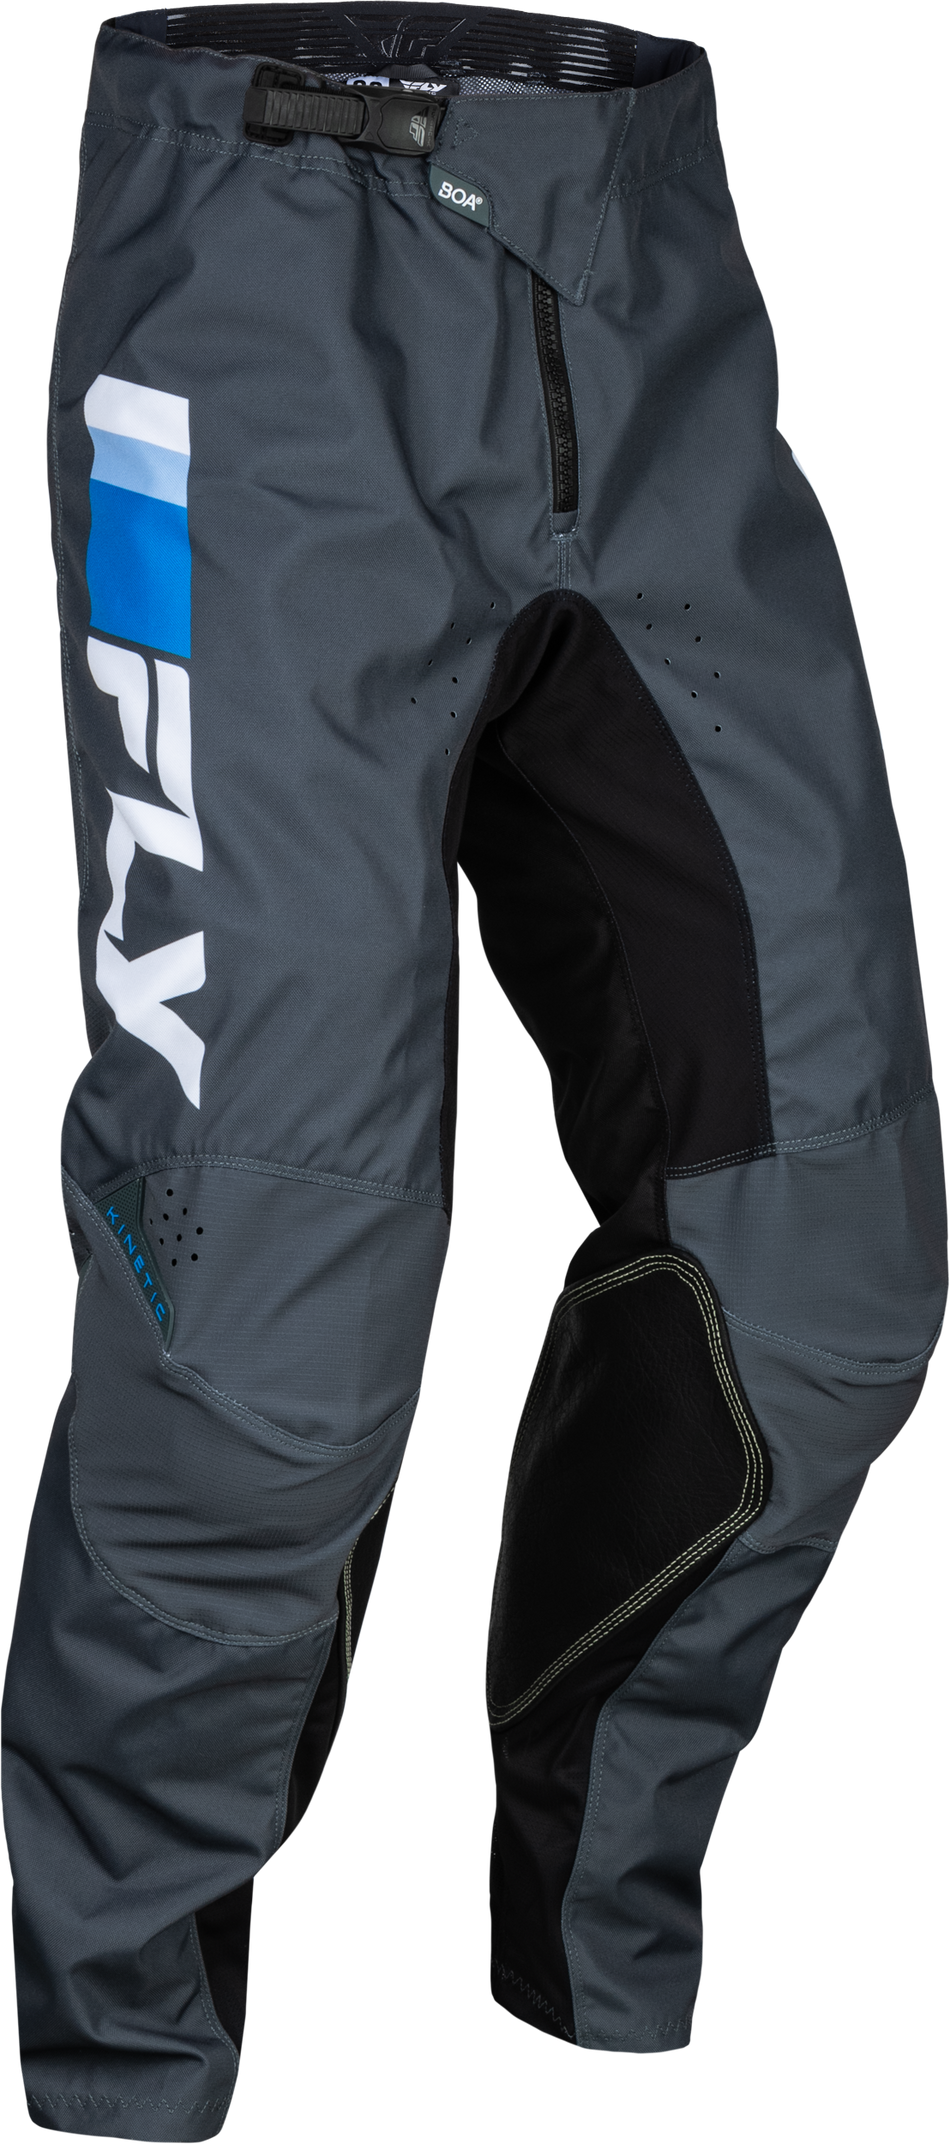 FLY RACING Youth Kinetic Prix Pants Bright Blue/Charcoal/Wht Sz 20 377-43020